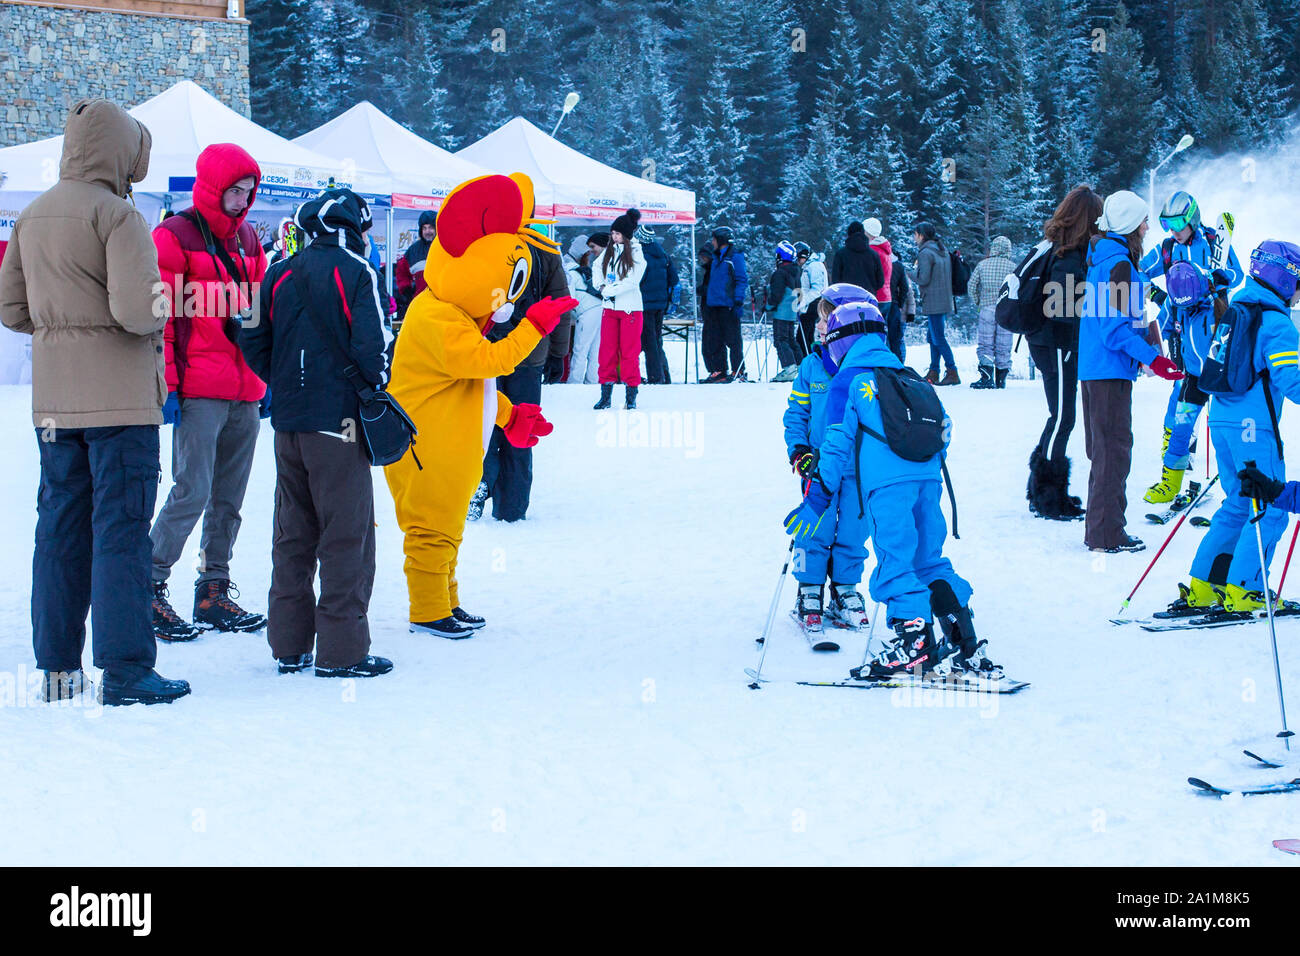 Bansko, Bulgaria - December, 12, 2015: Young skiers talking to Mouse in Costume at ski resort Stock Photo